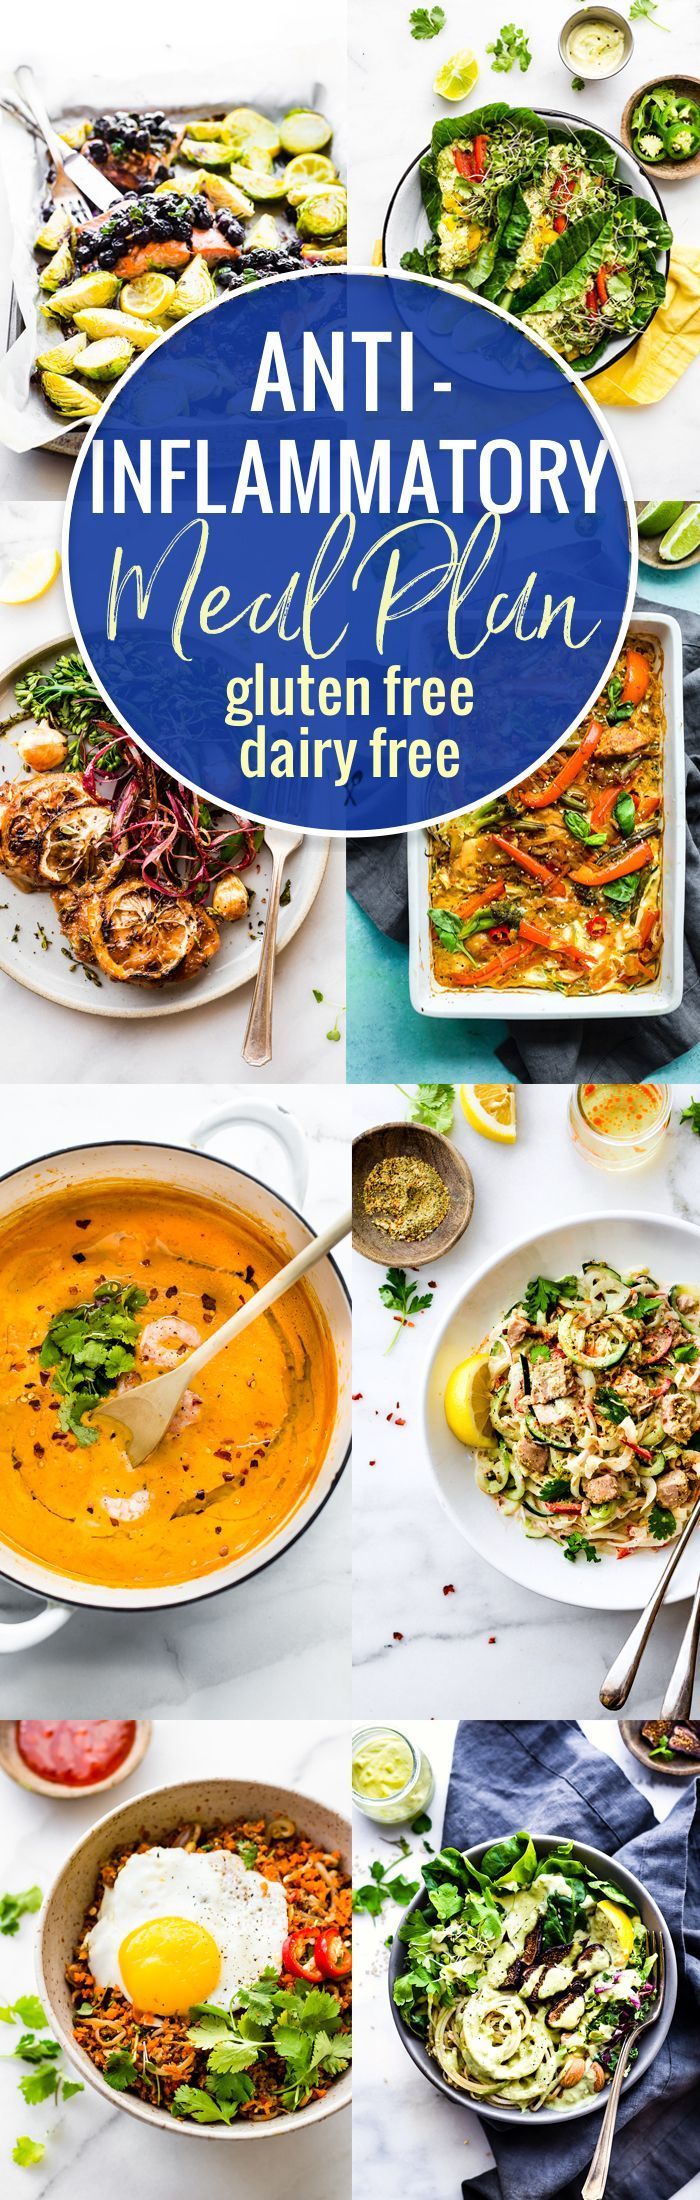 Food plays an key role in reducing inflammation in the body, so here’s a dairy free and gluten-free anti-inflammatory meal plan.